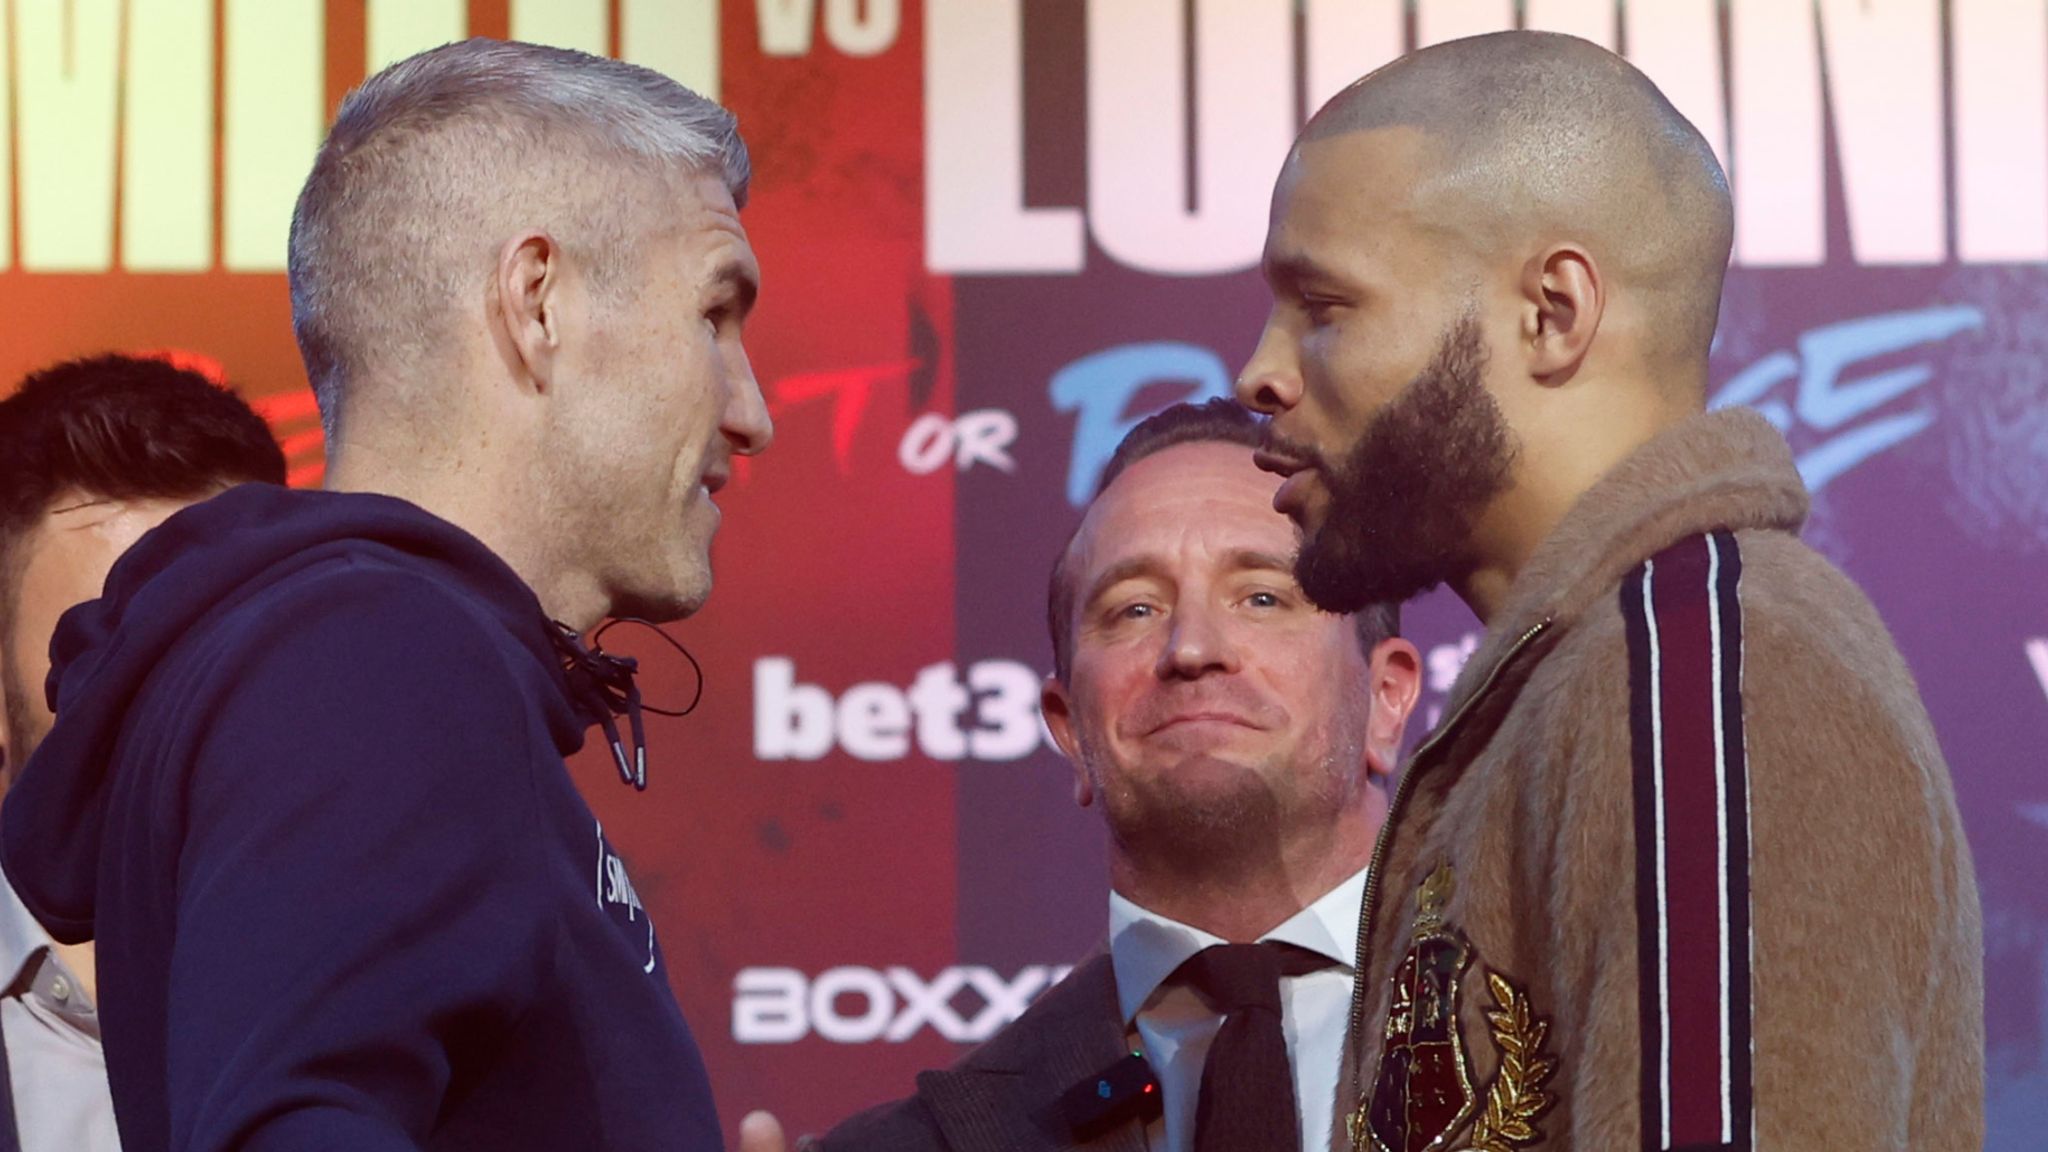 Liam Smith vs Chris Eubank Jr rematch What time are they in the ring? How can I watch? Boxing News Sky Sports